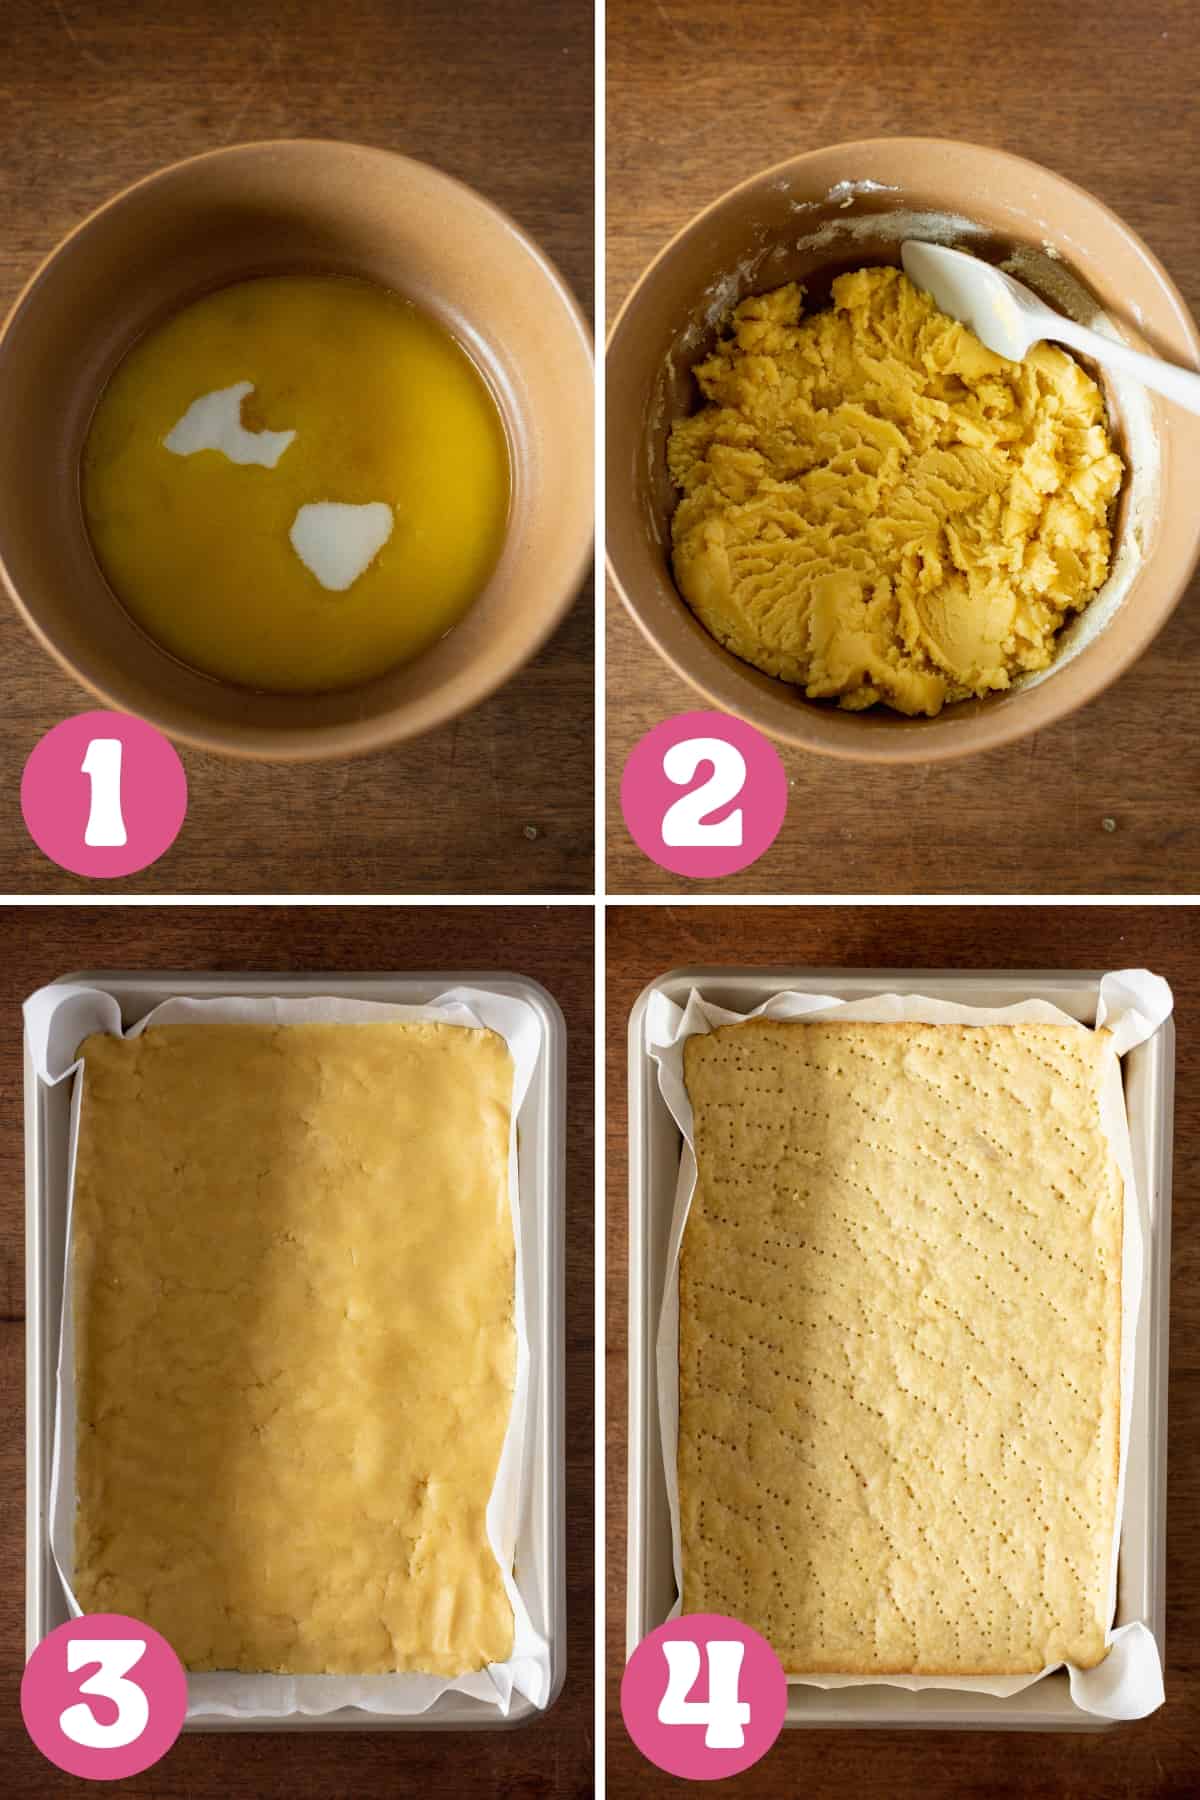 Collage of 4 images showing steps 1-4 of how to make lemon cranberry bars